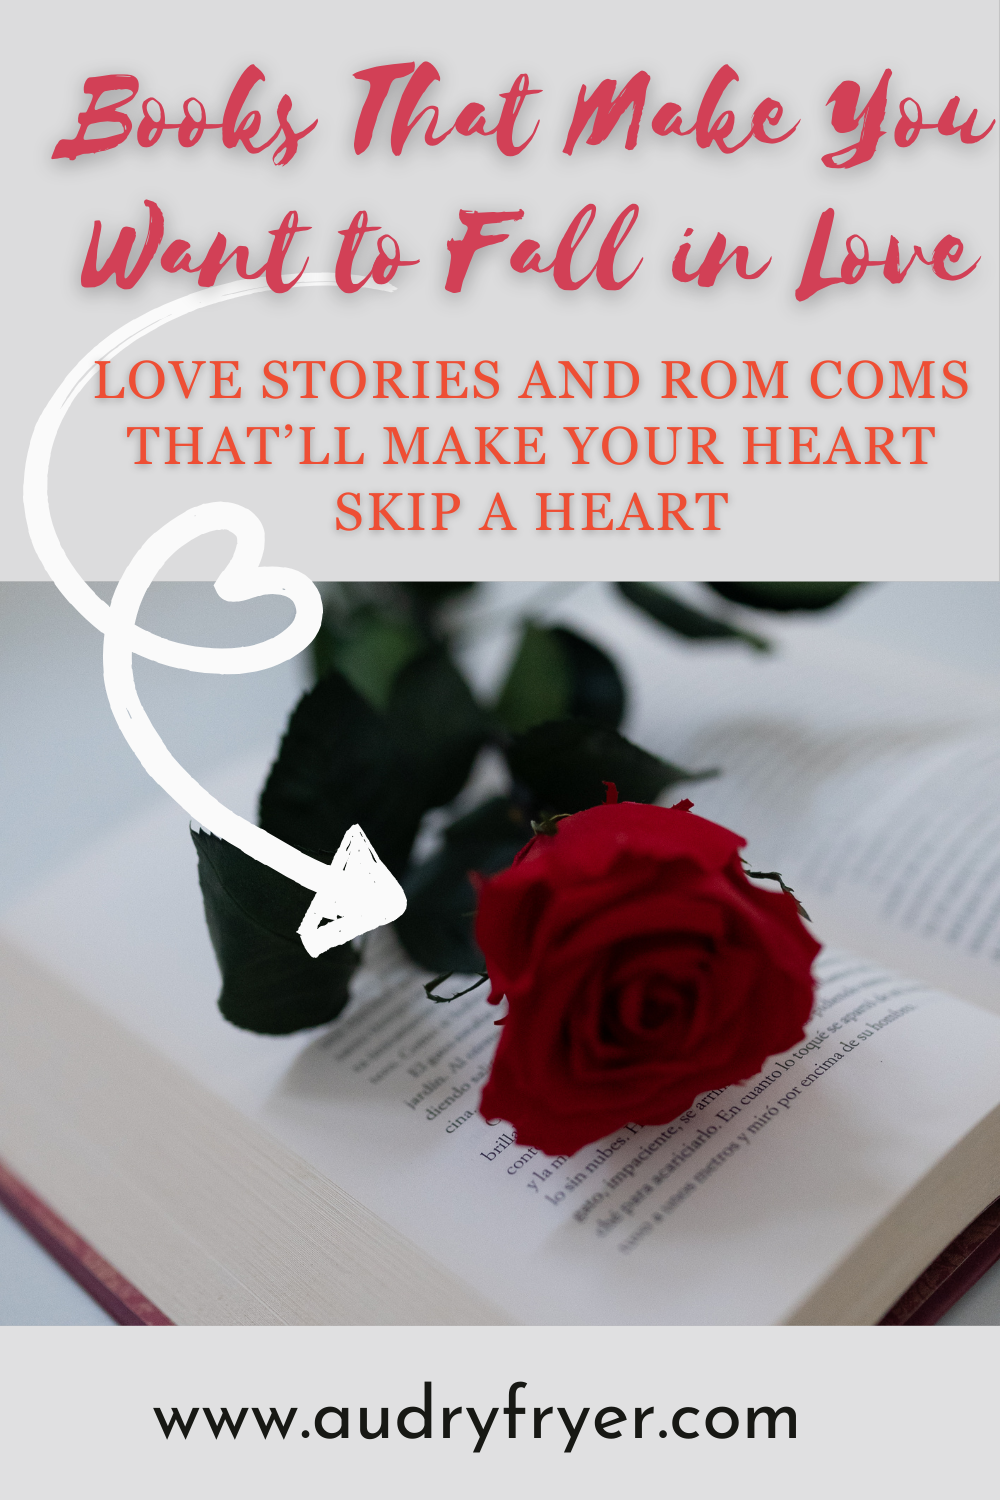 A rose on an open book with text: books that make you want to fall in love - love stories and rom coms that'll make your heart skip a beat.